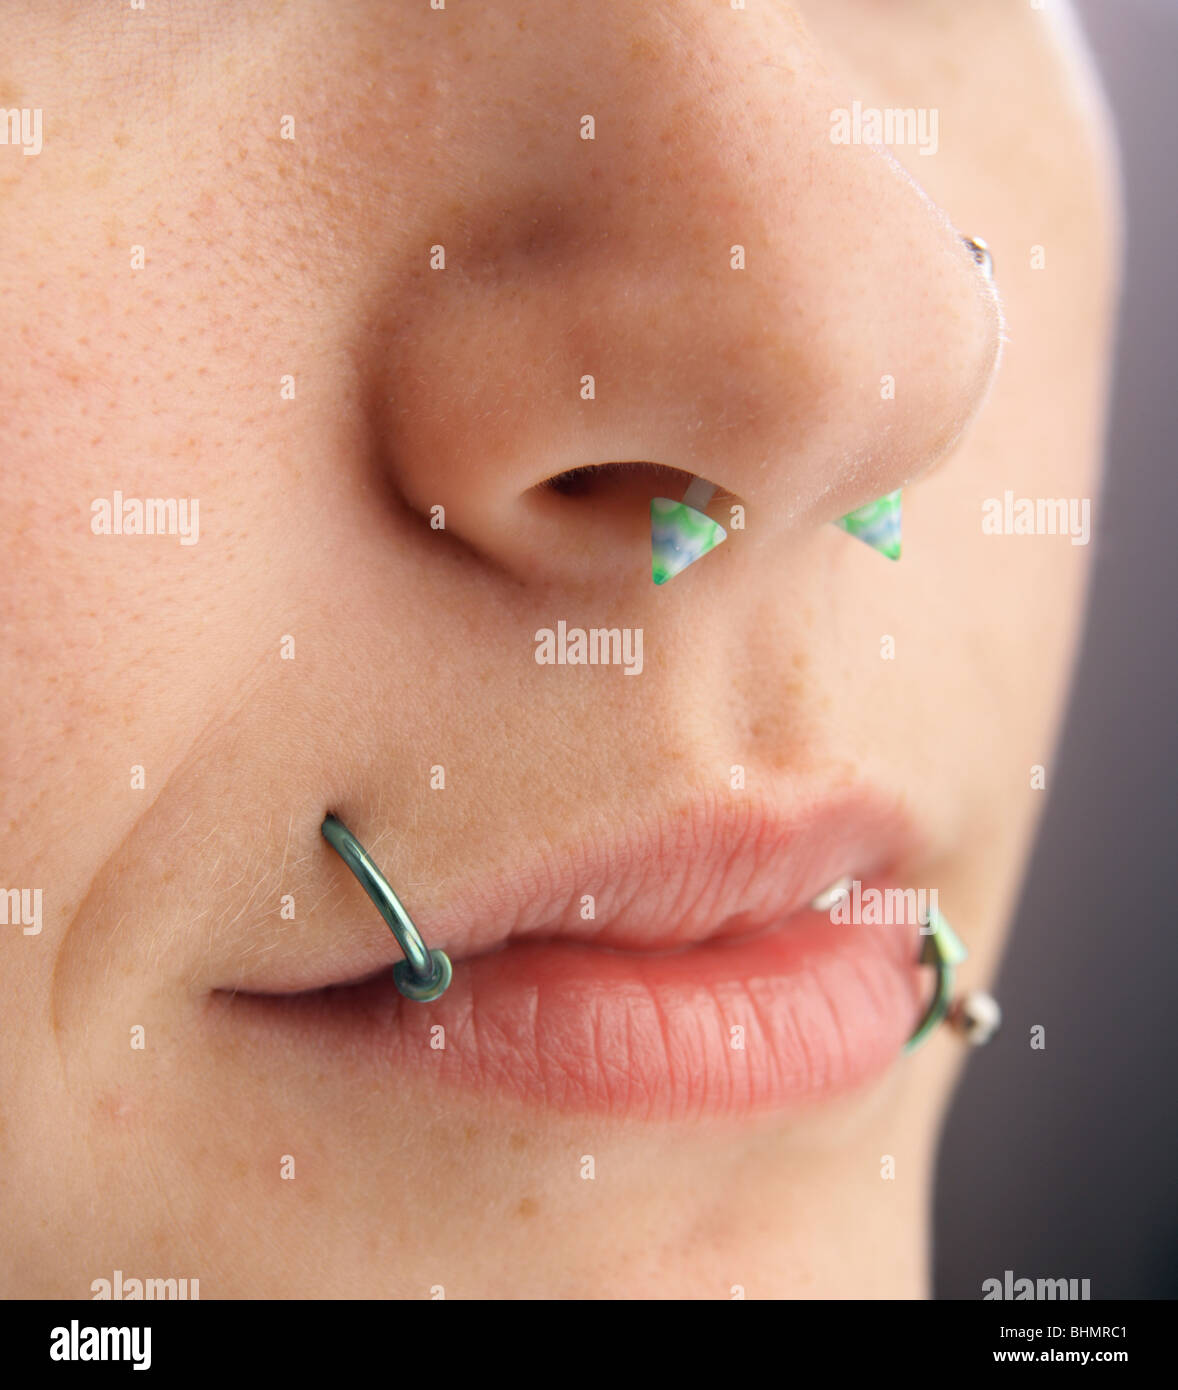 close up of a young womans face showing lip and nose piercings. Stock Photo